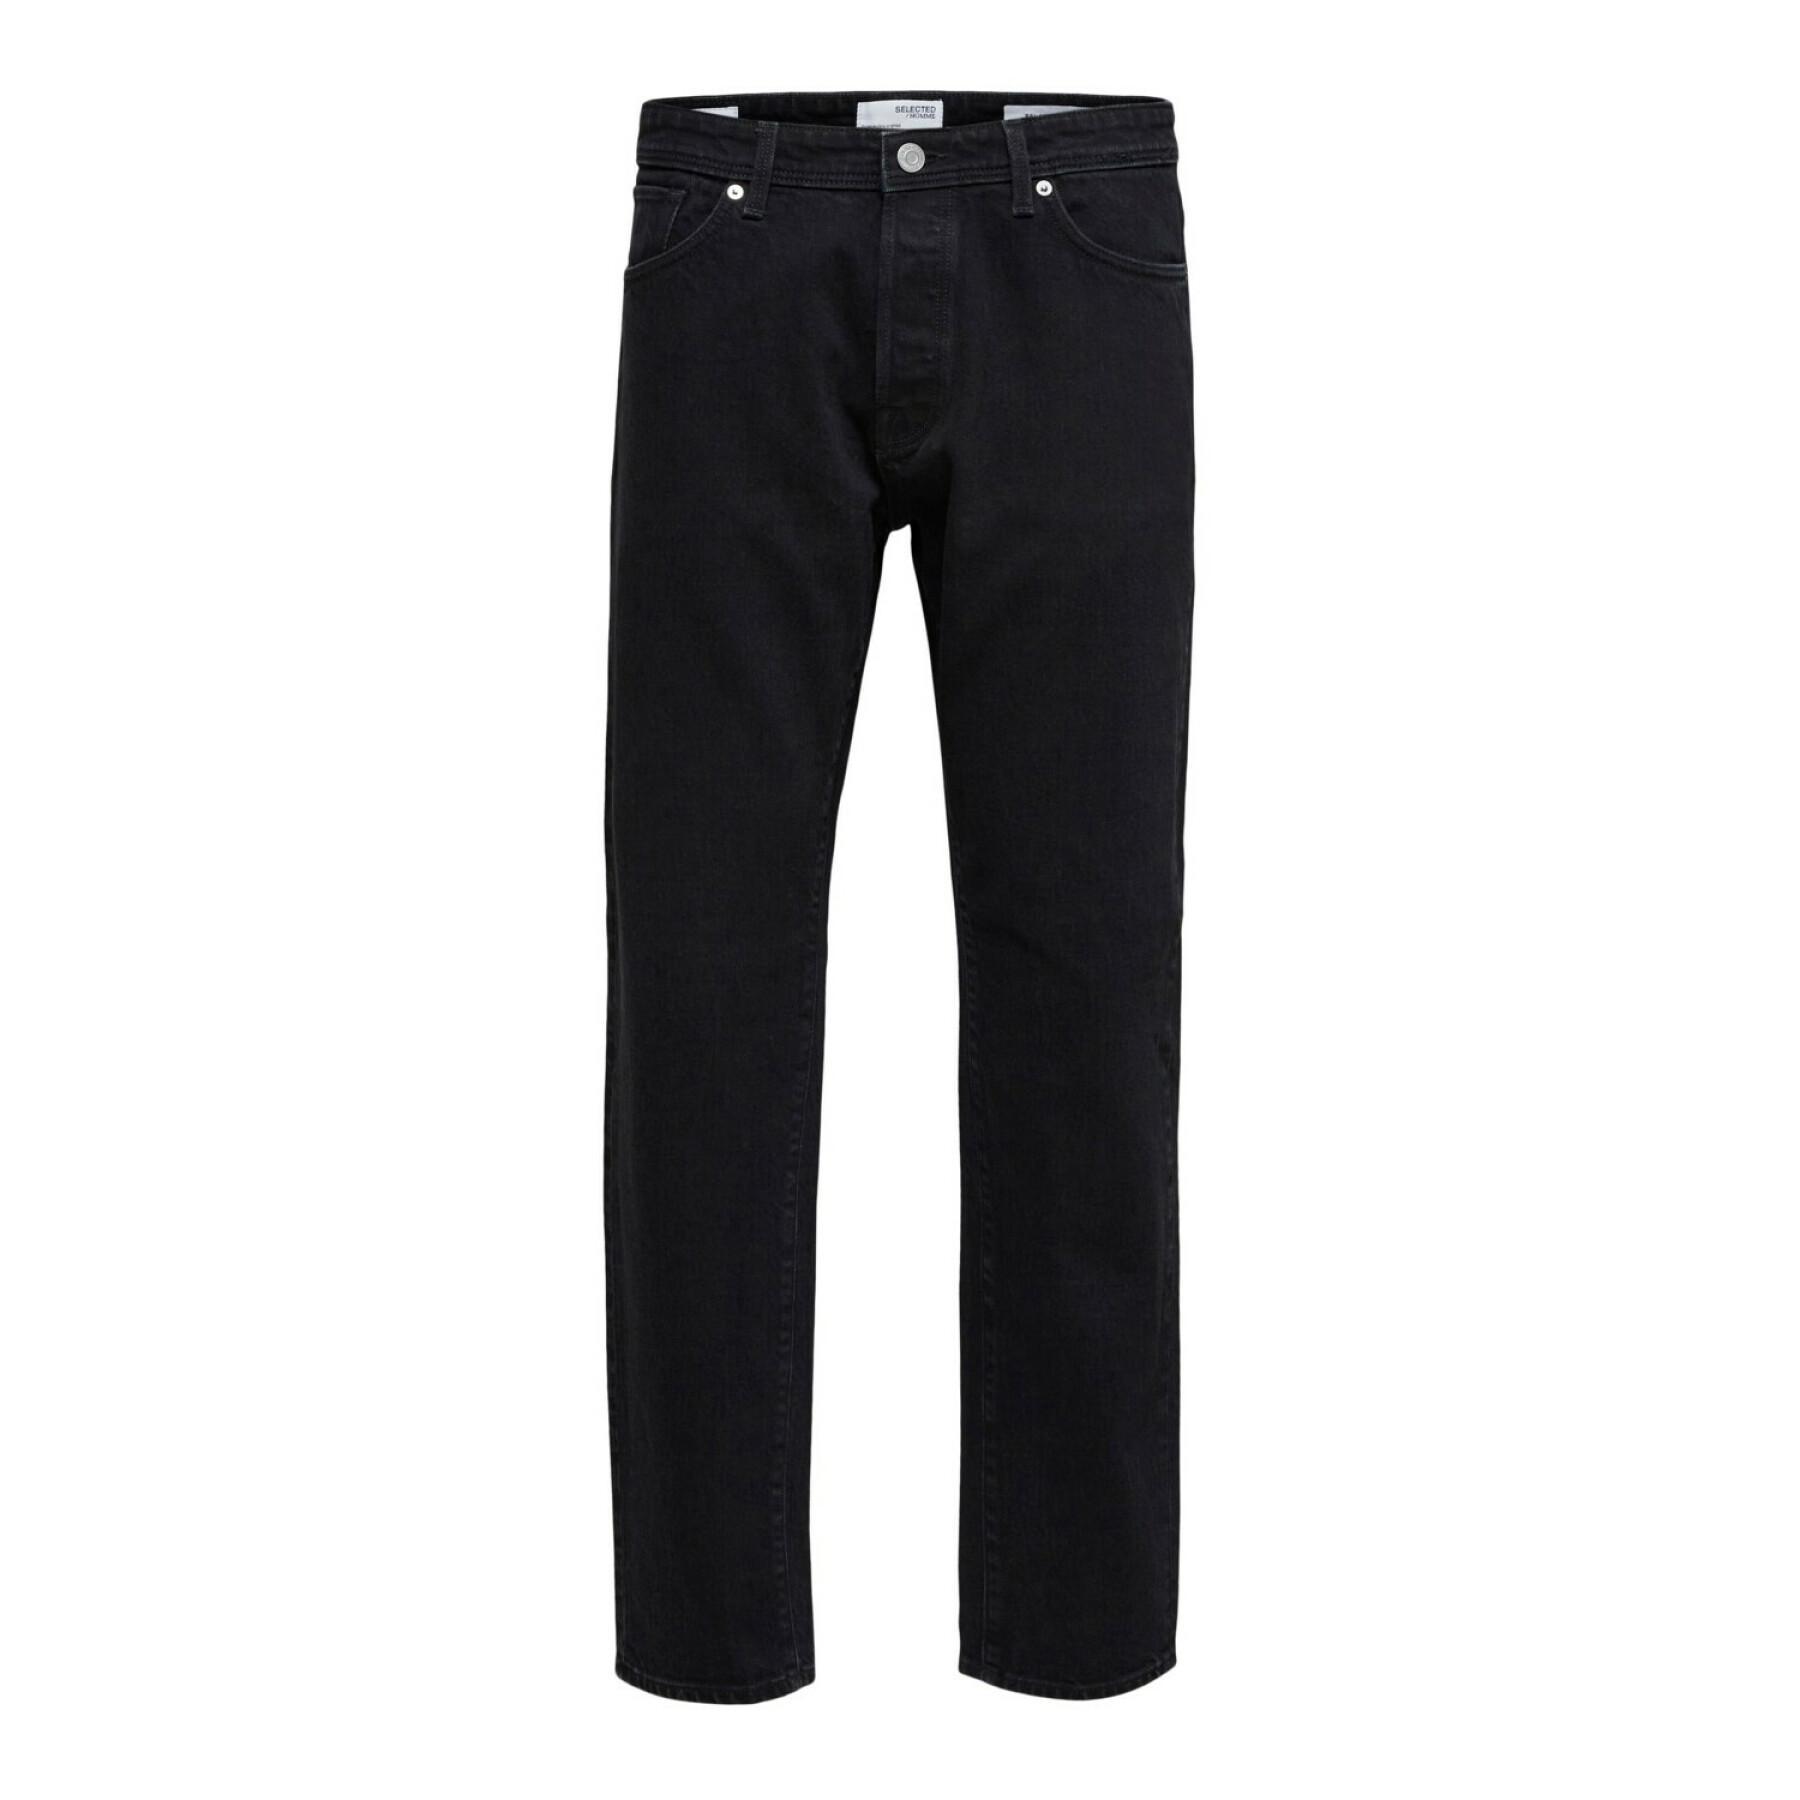 Slim jeans Selected Toby 3072